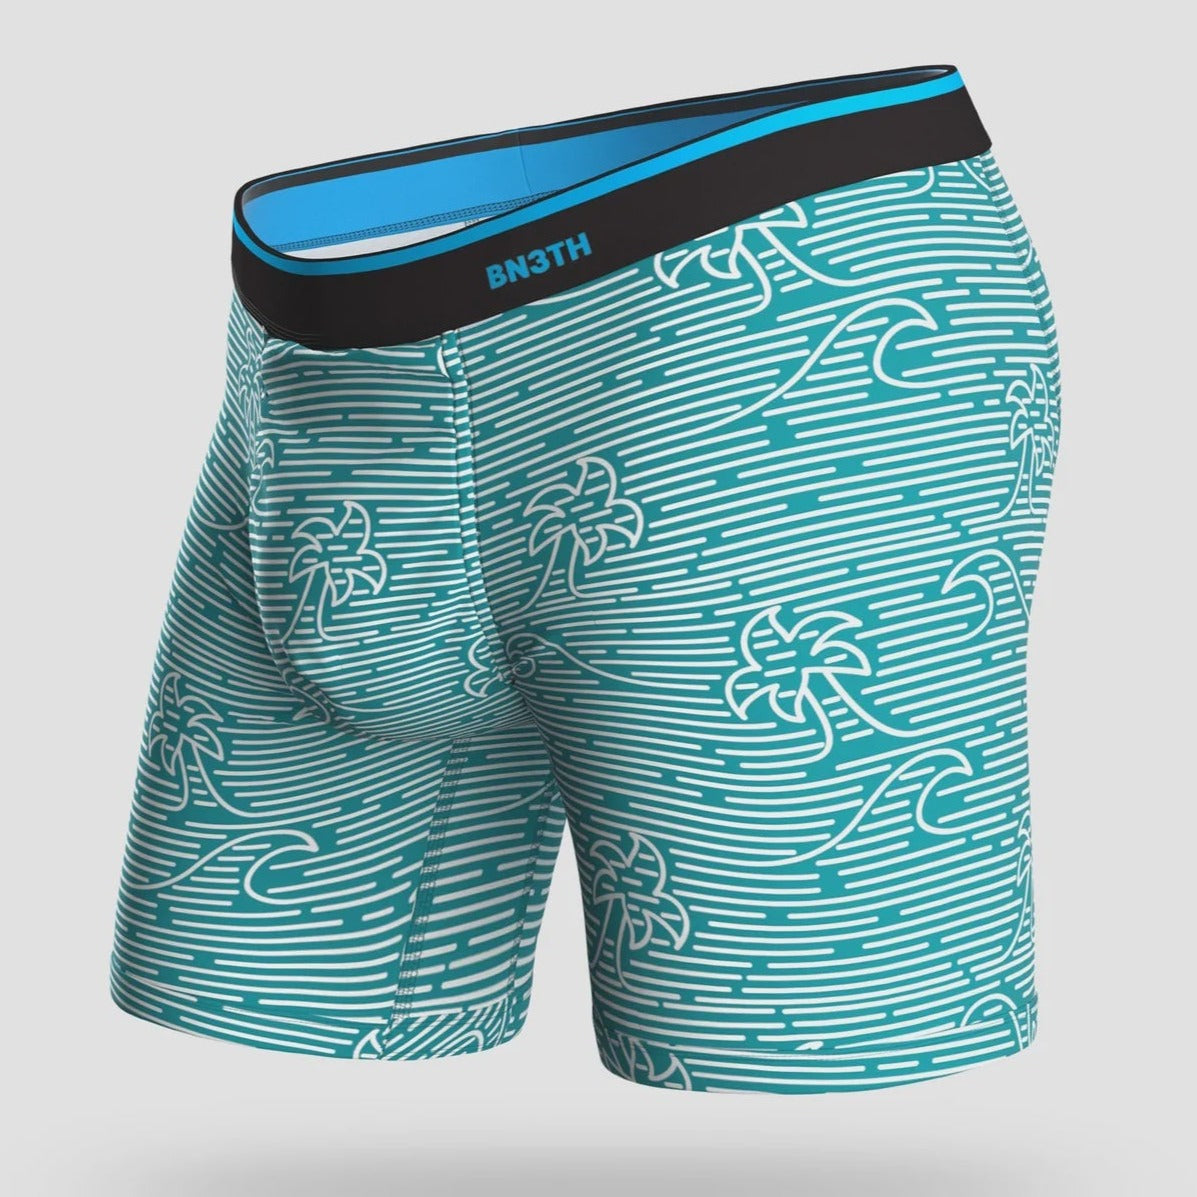 BN3TH - CLASSIC BOXER BRIEF PRINT IN LINEAR WAVE - TURQUOISE